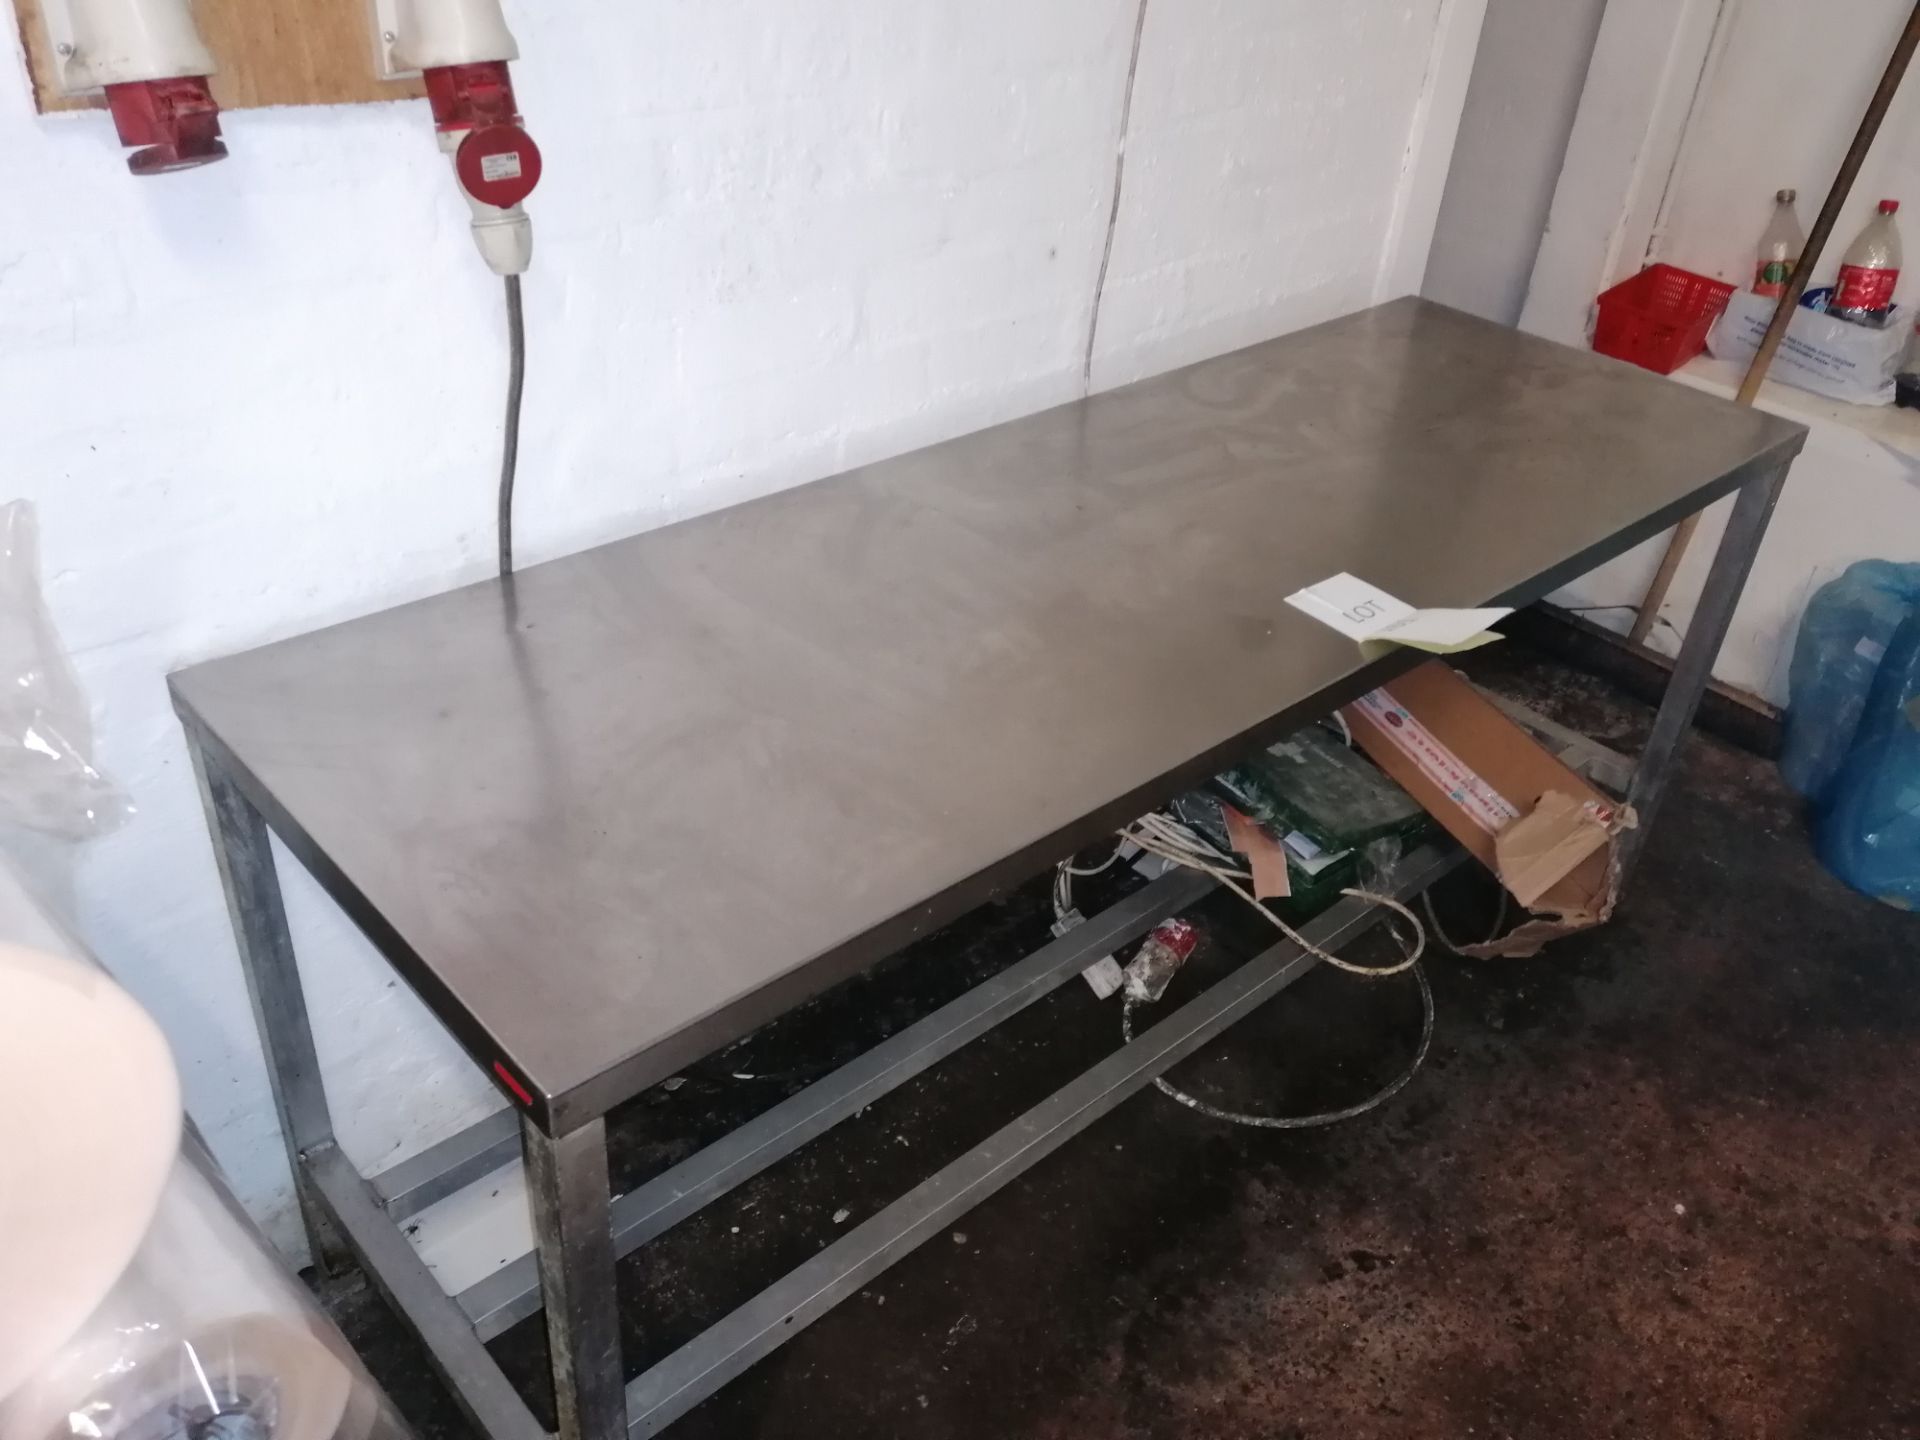 Stainless Steel Preperation Table With Aluminium Frame Length 182cm x Width 81cm x Height 79cm - Image 2 of 4